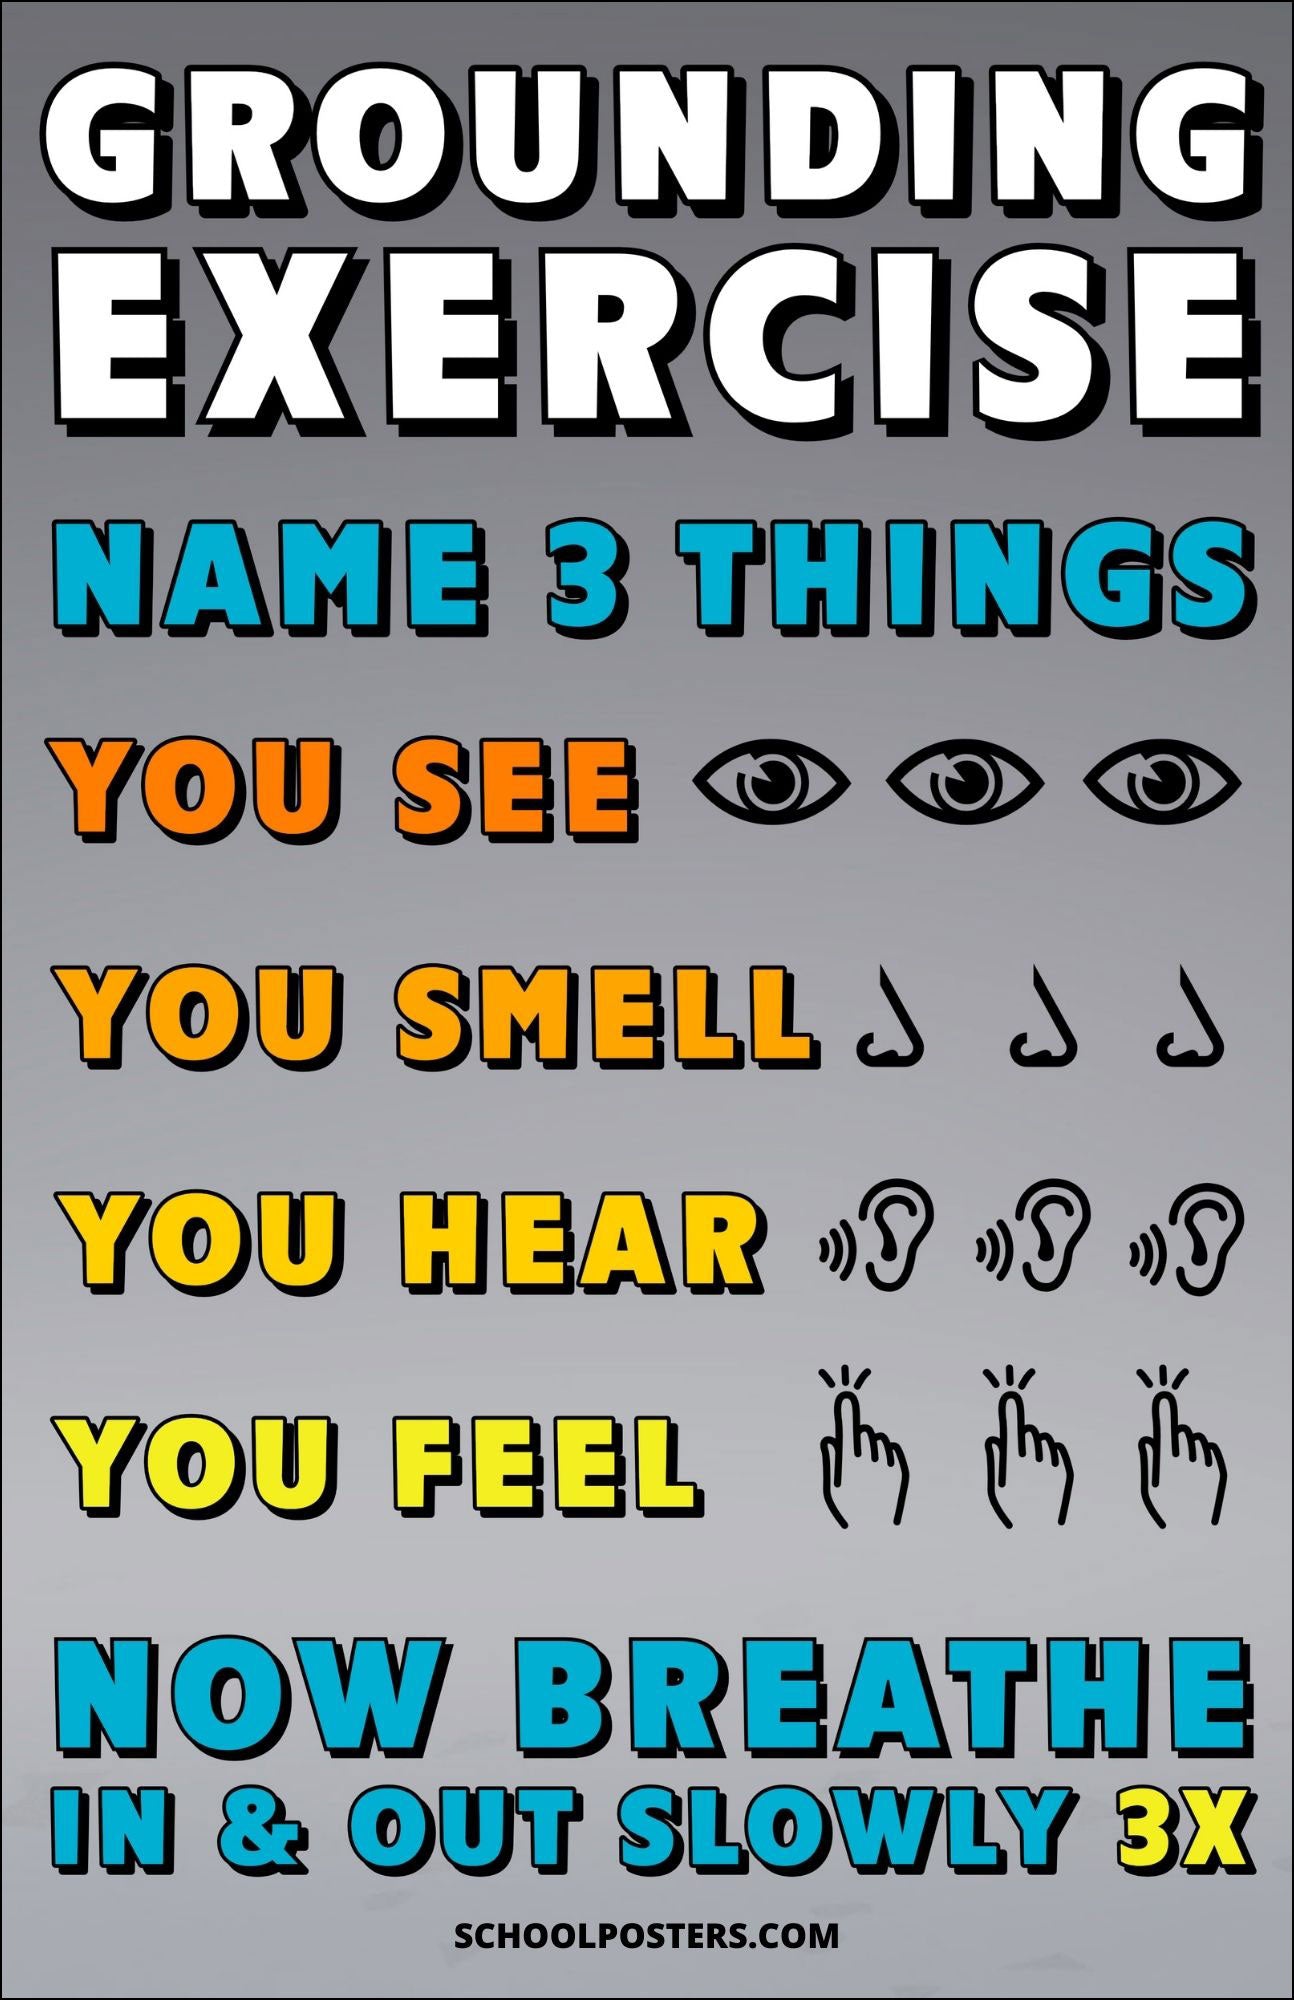 Grounding Exercise Poster